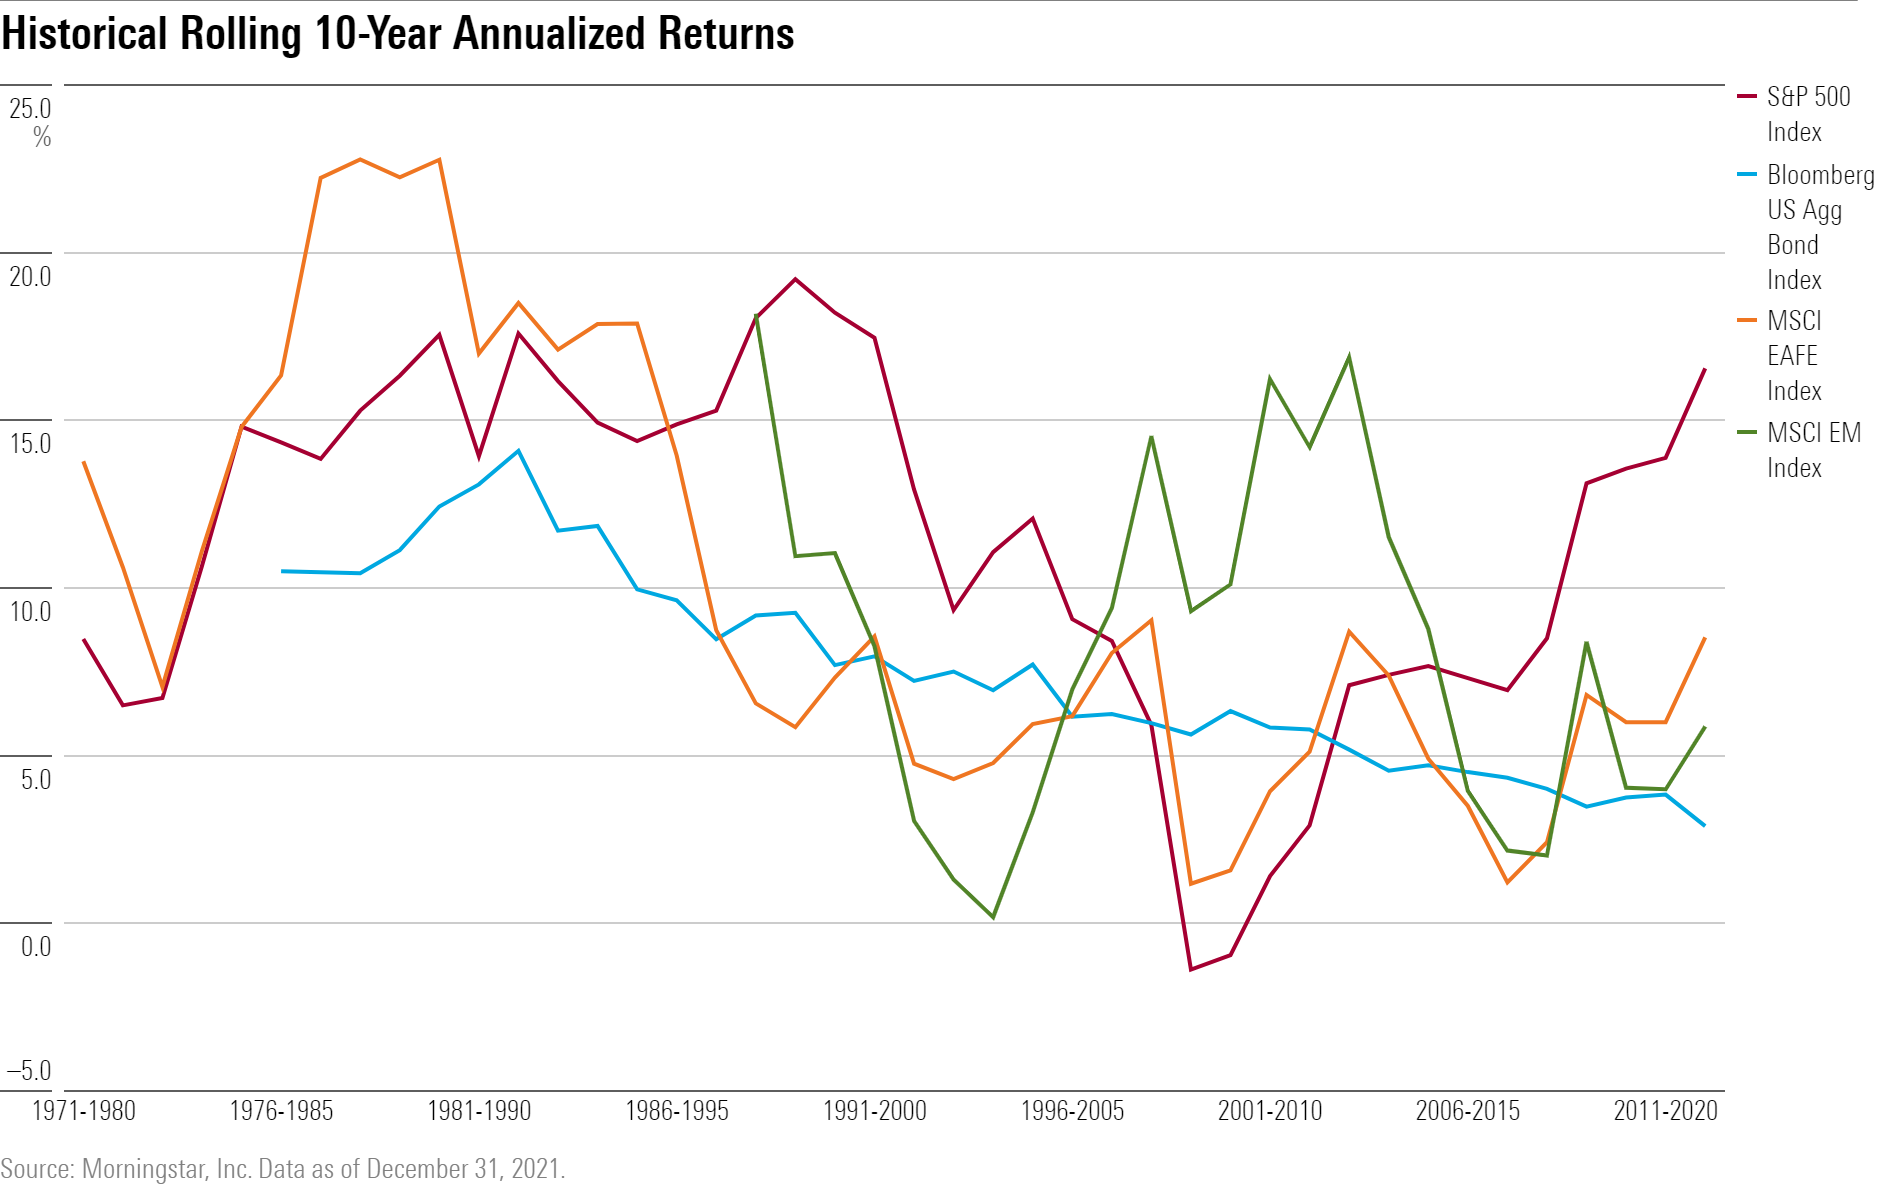 A line chart showing rolling annualized 10-year returns between 1971 and 2021.